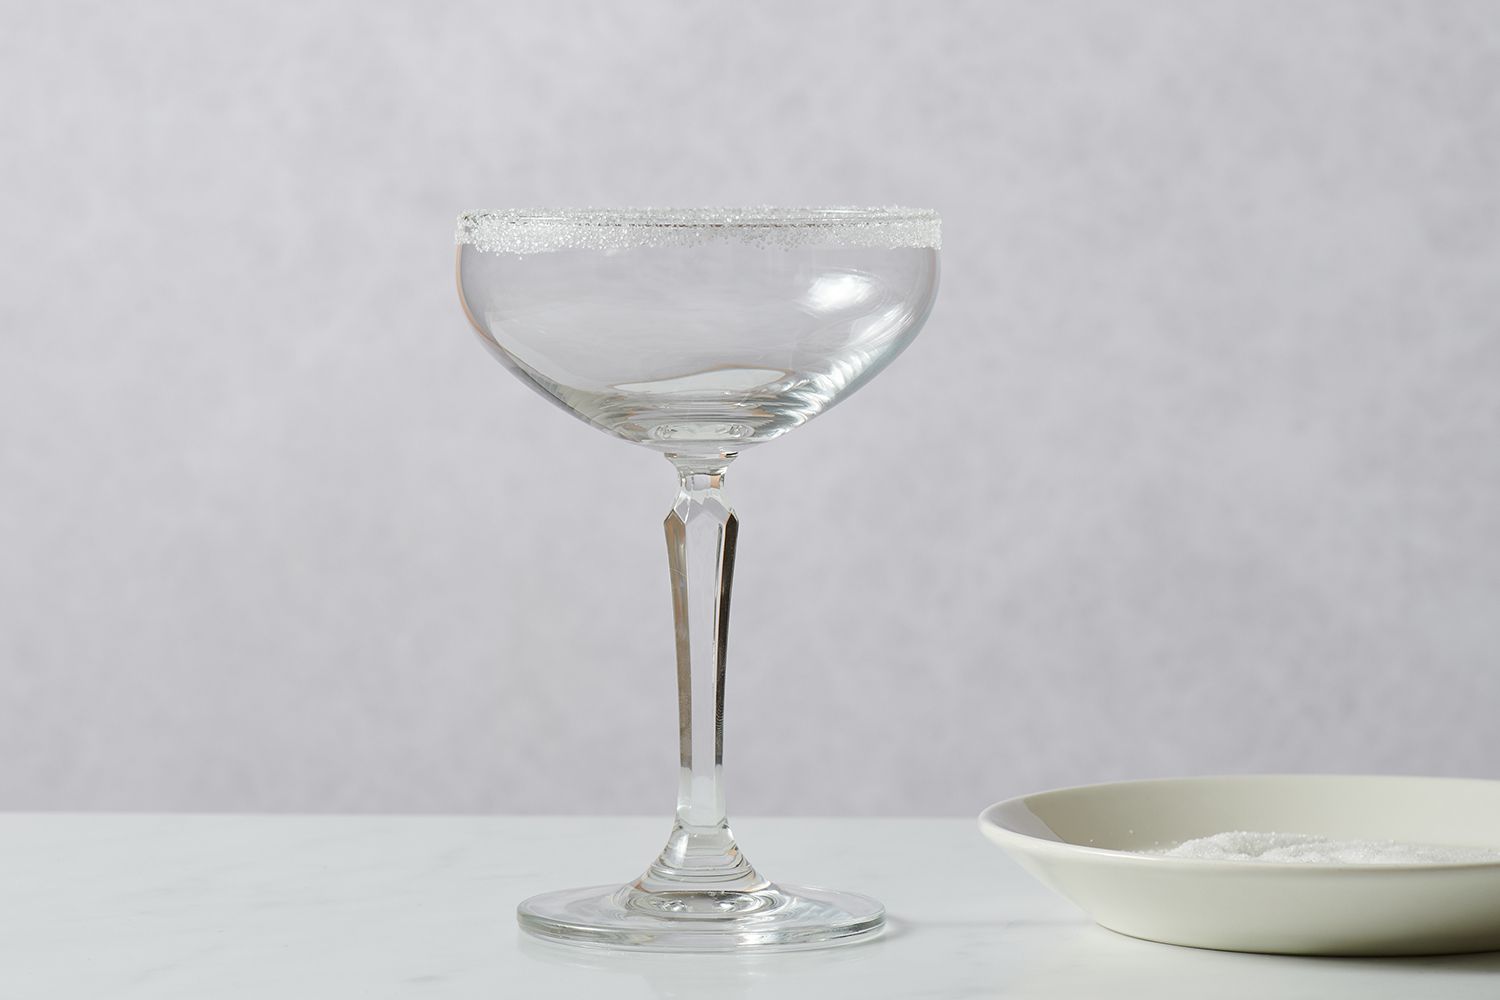 A sugar-rimmed cocktail glass